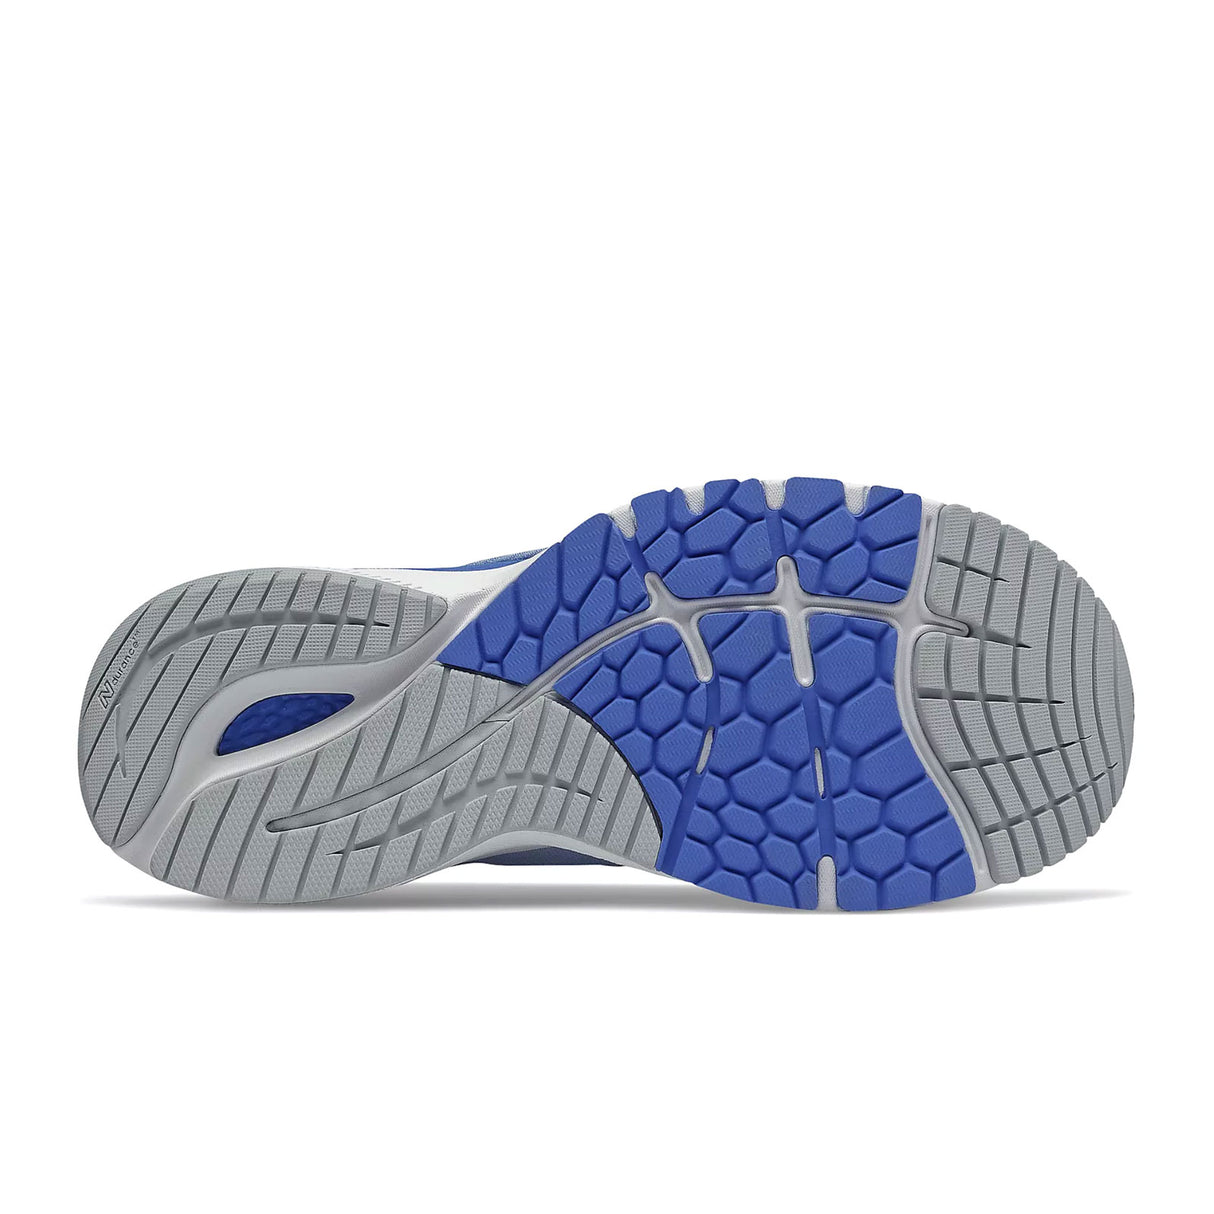 Women's Blue Stability Running Shoes